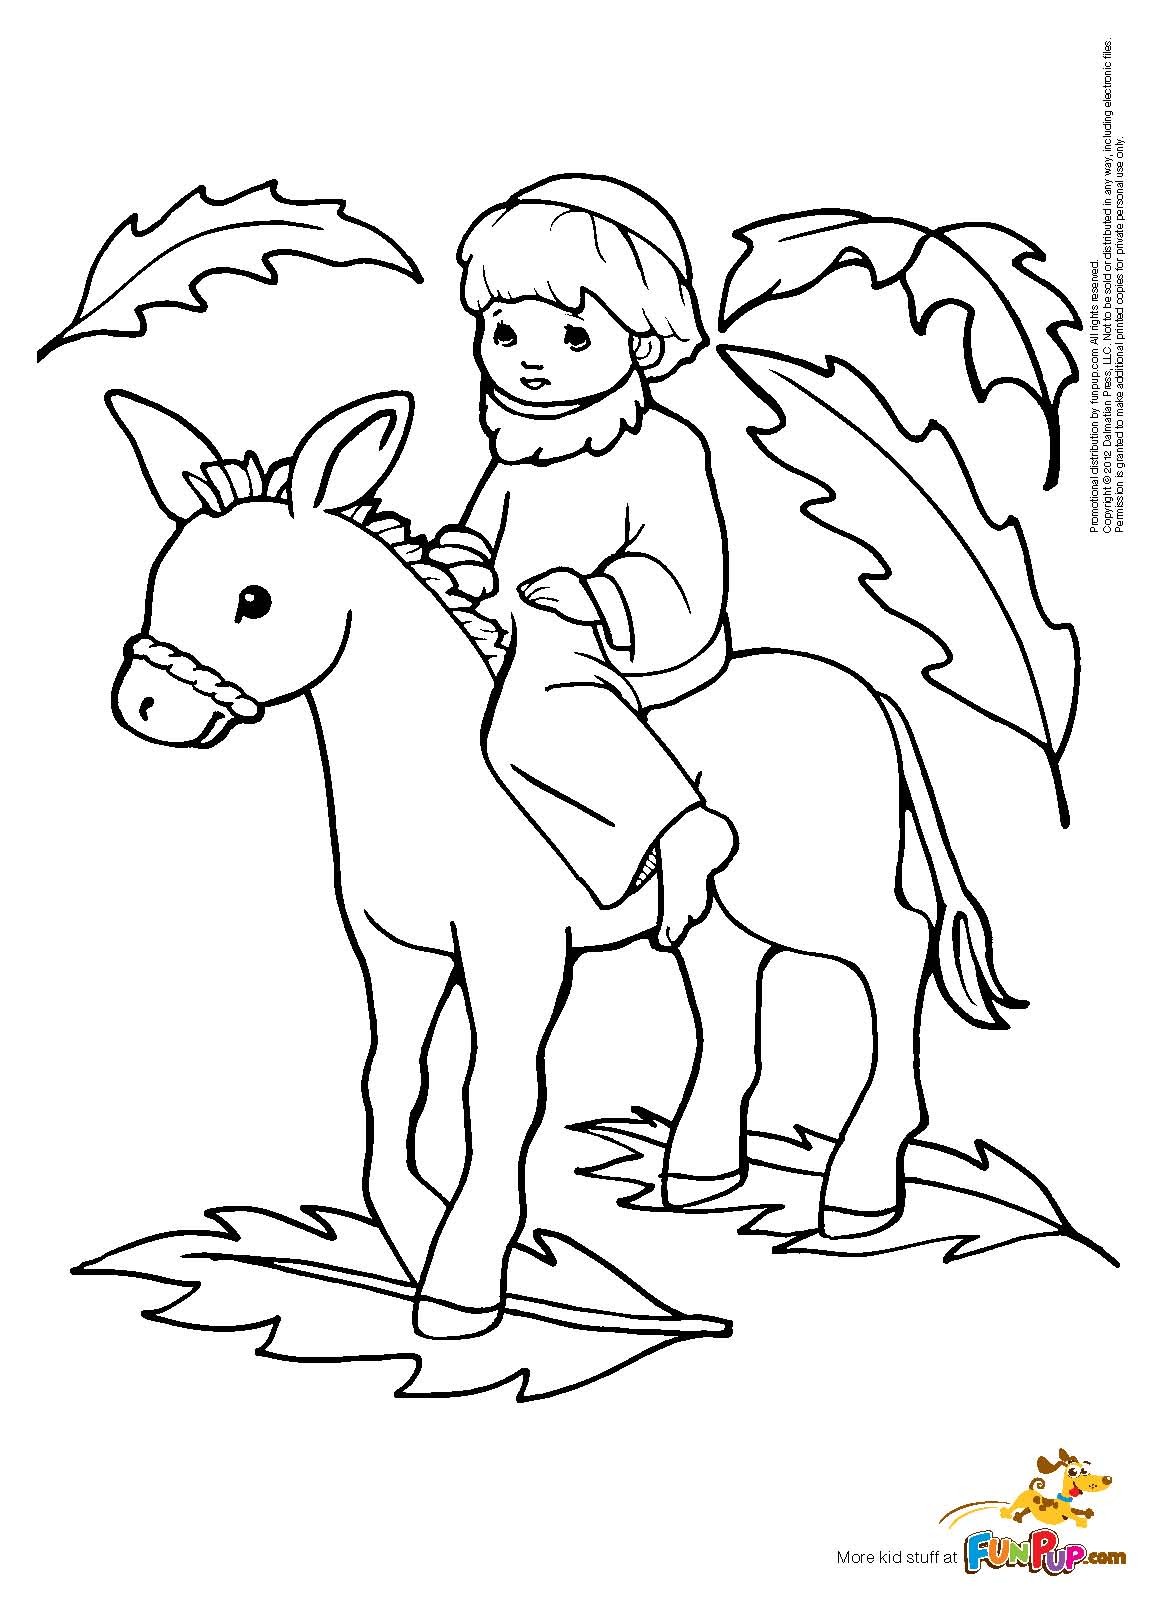 Palm Sunday Coloring Pages - Coloring Home